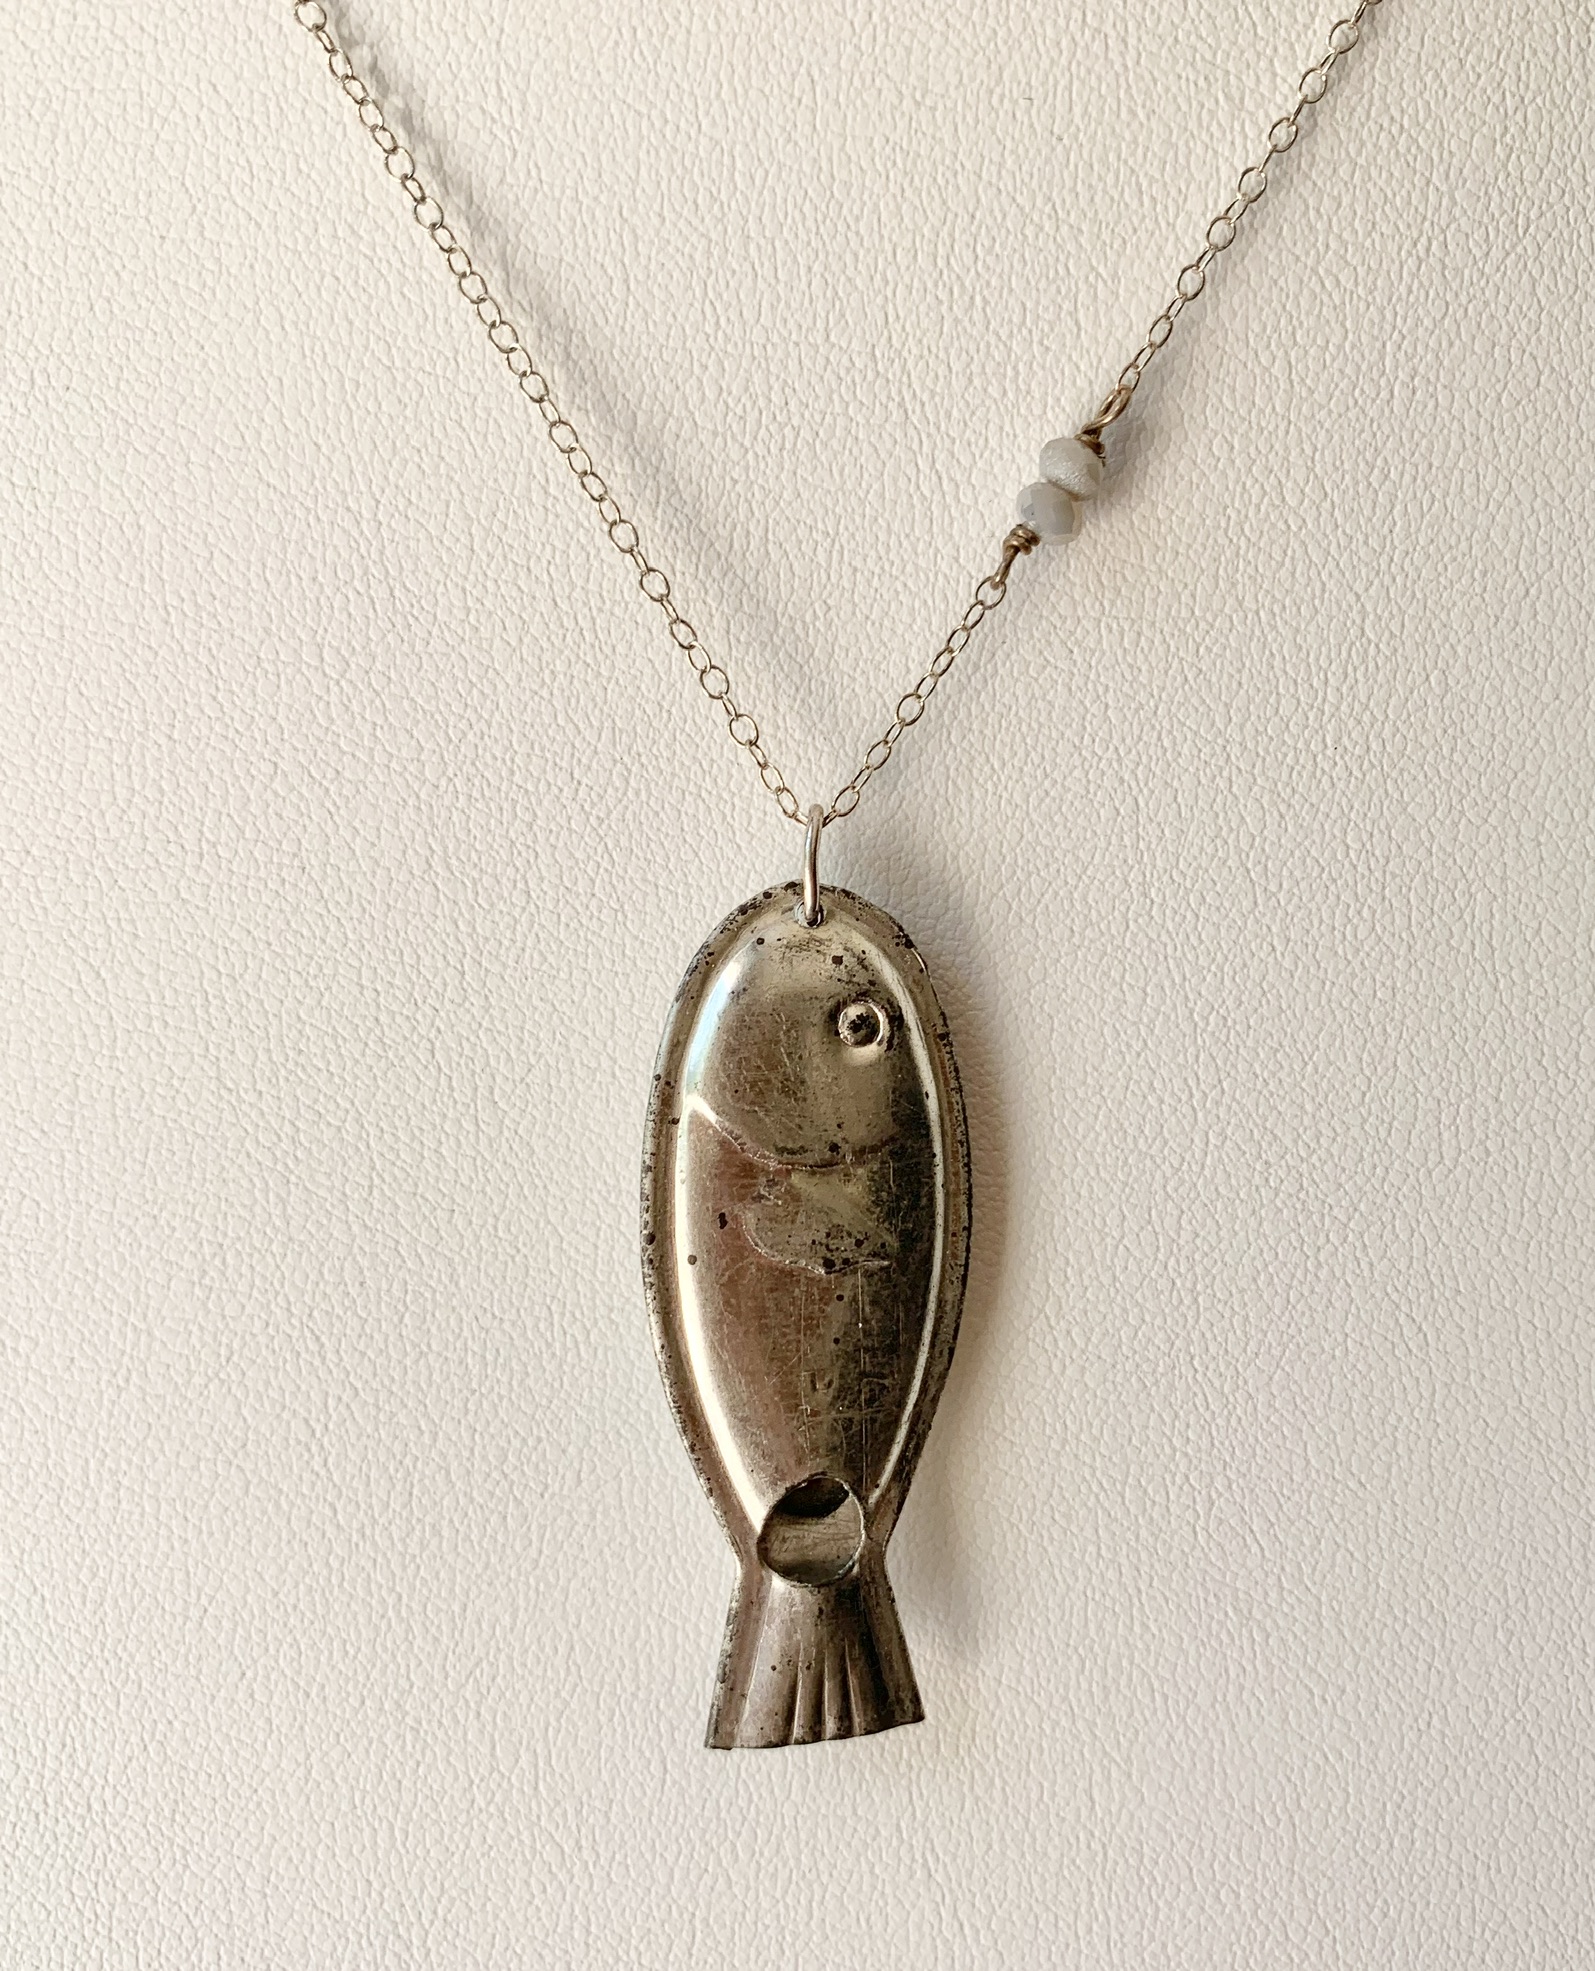 Vintage Fish Whistle Necklace – The Scarlet Poppy